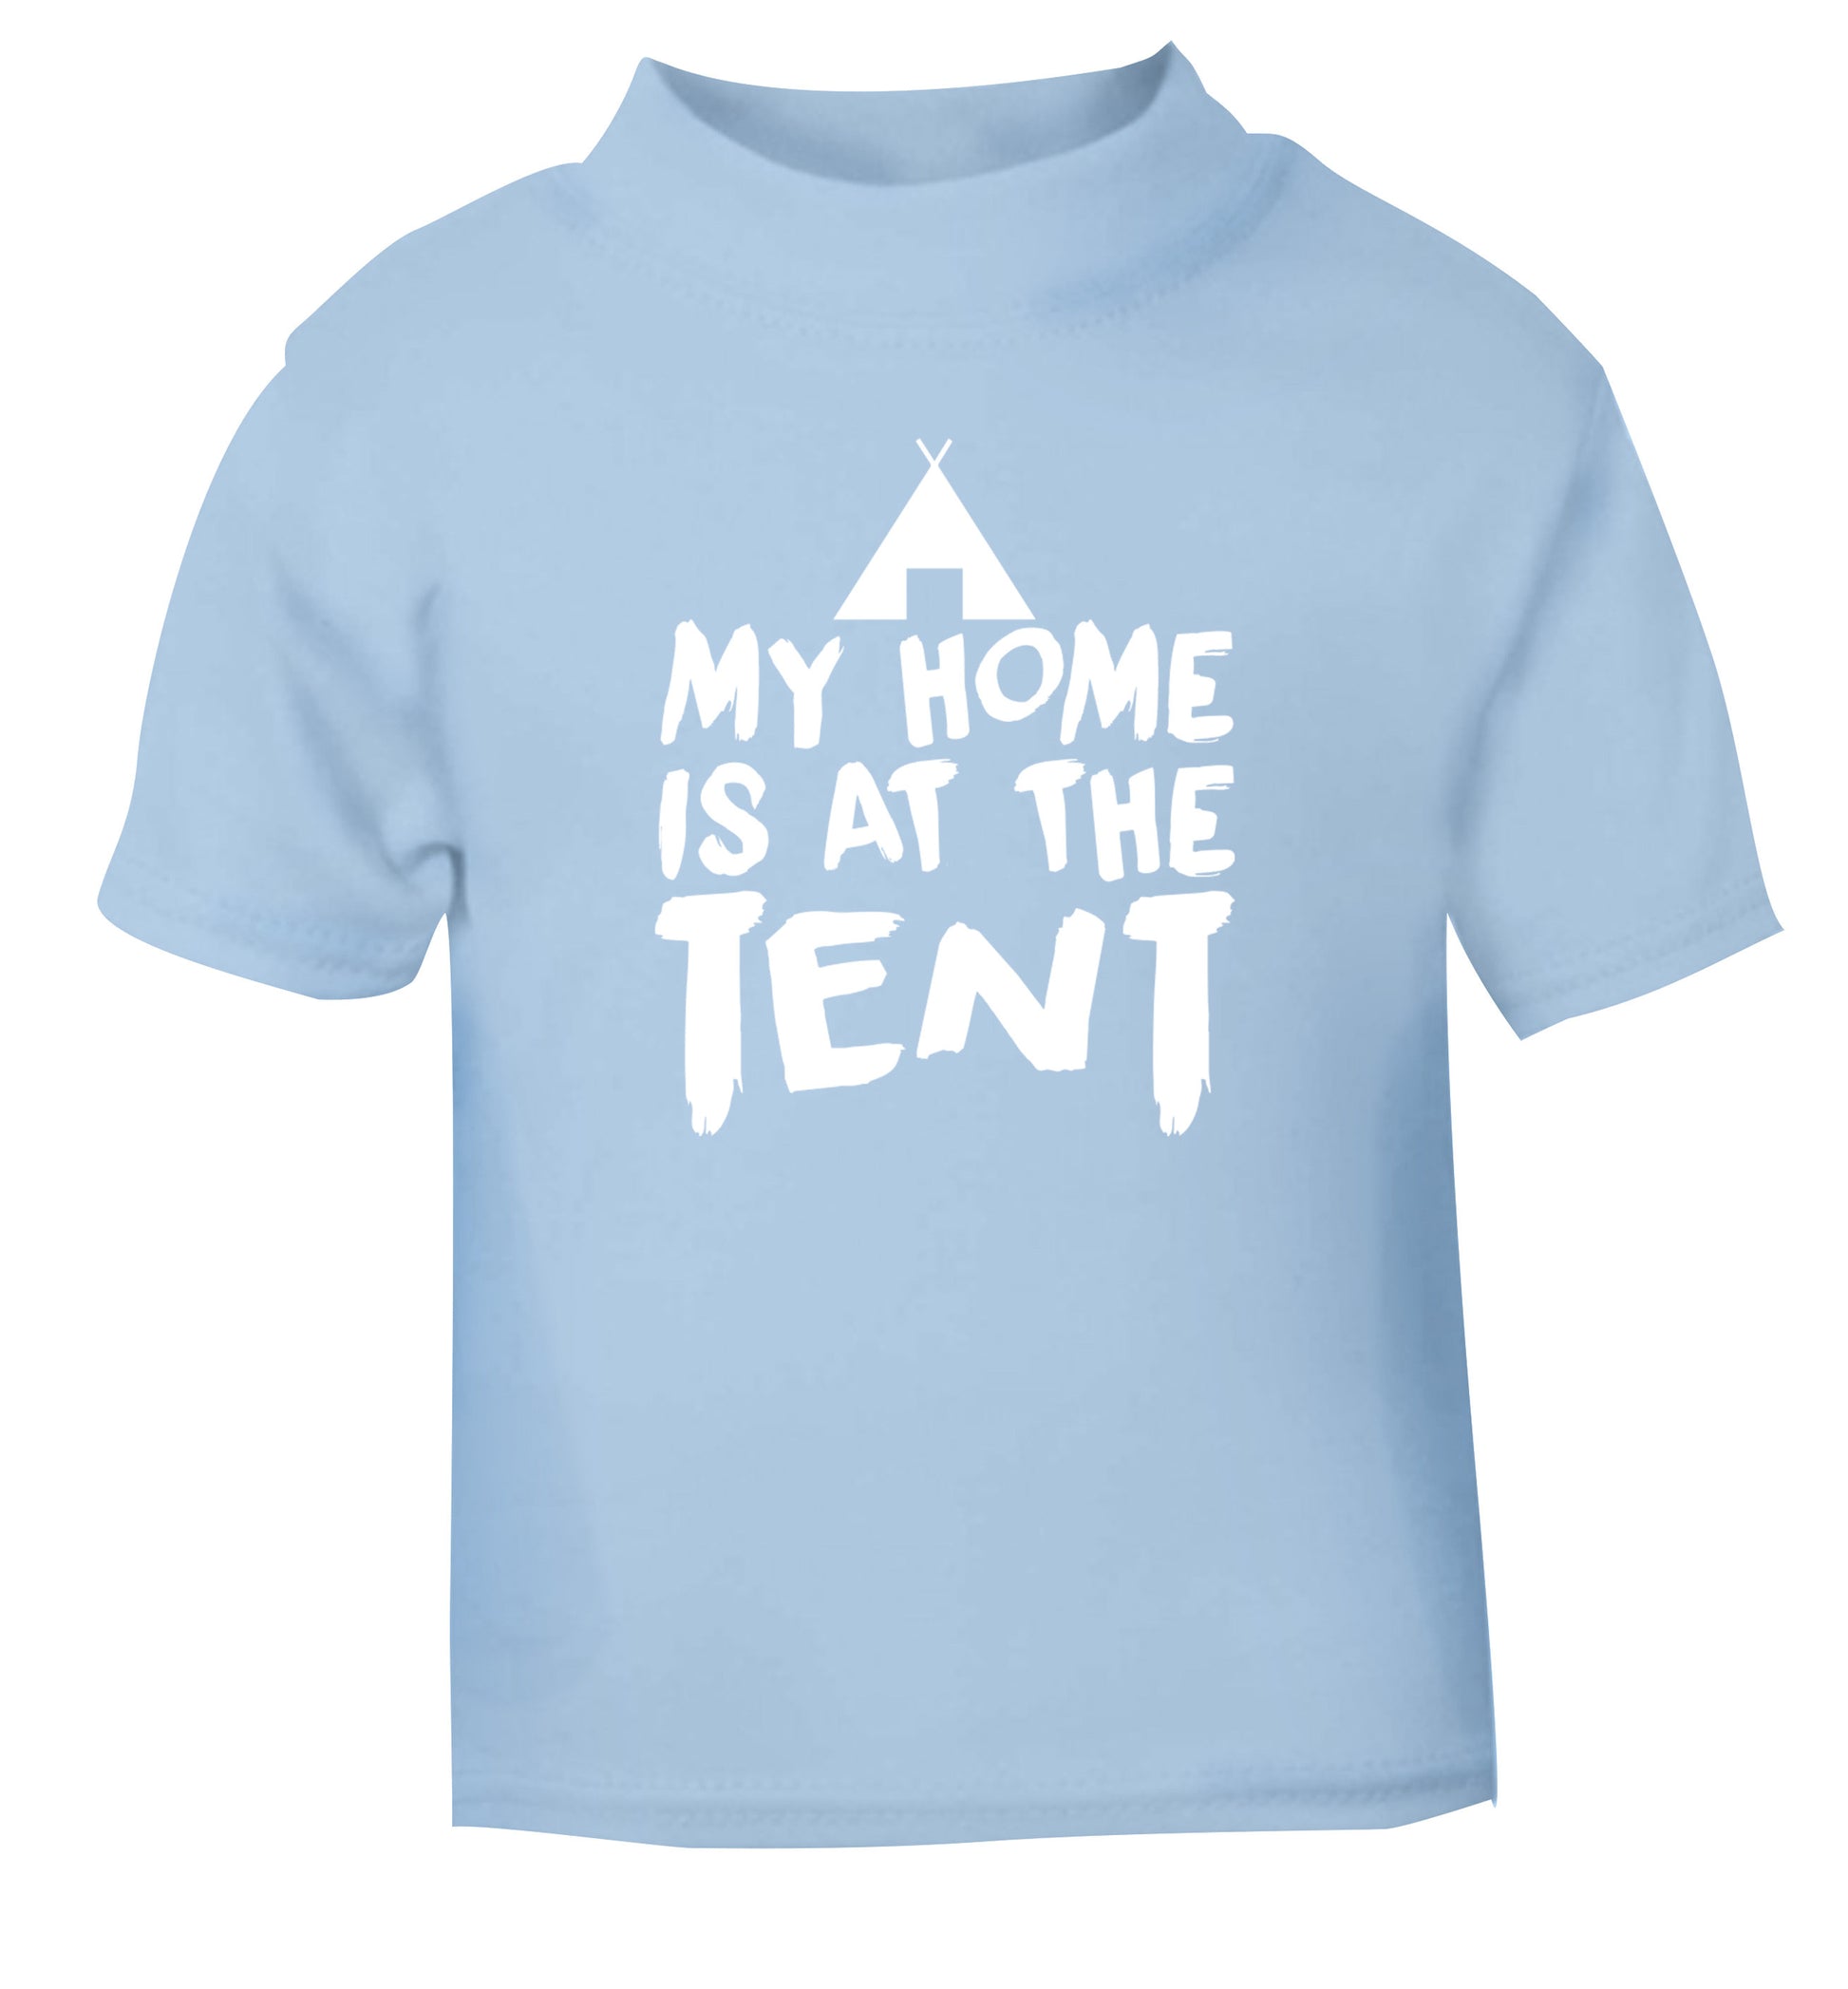 My home is at the tent light blue Baby Toddler Tshirt 2 Years